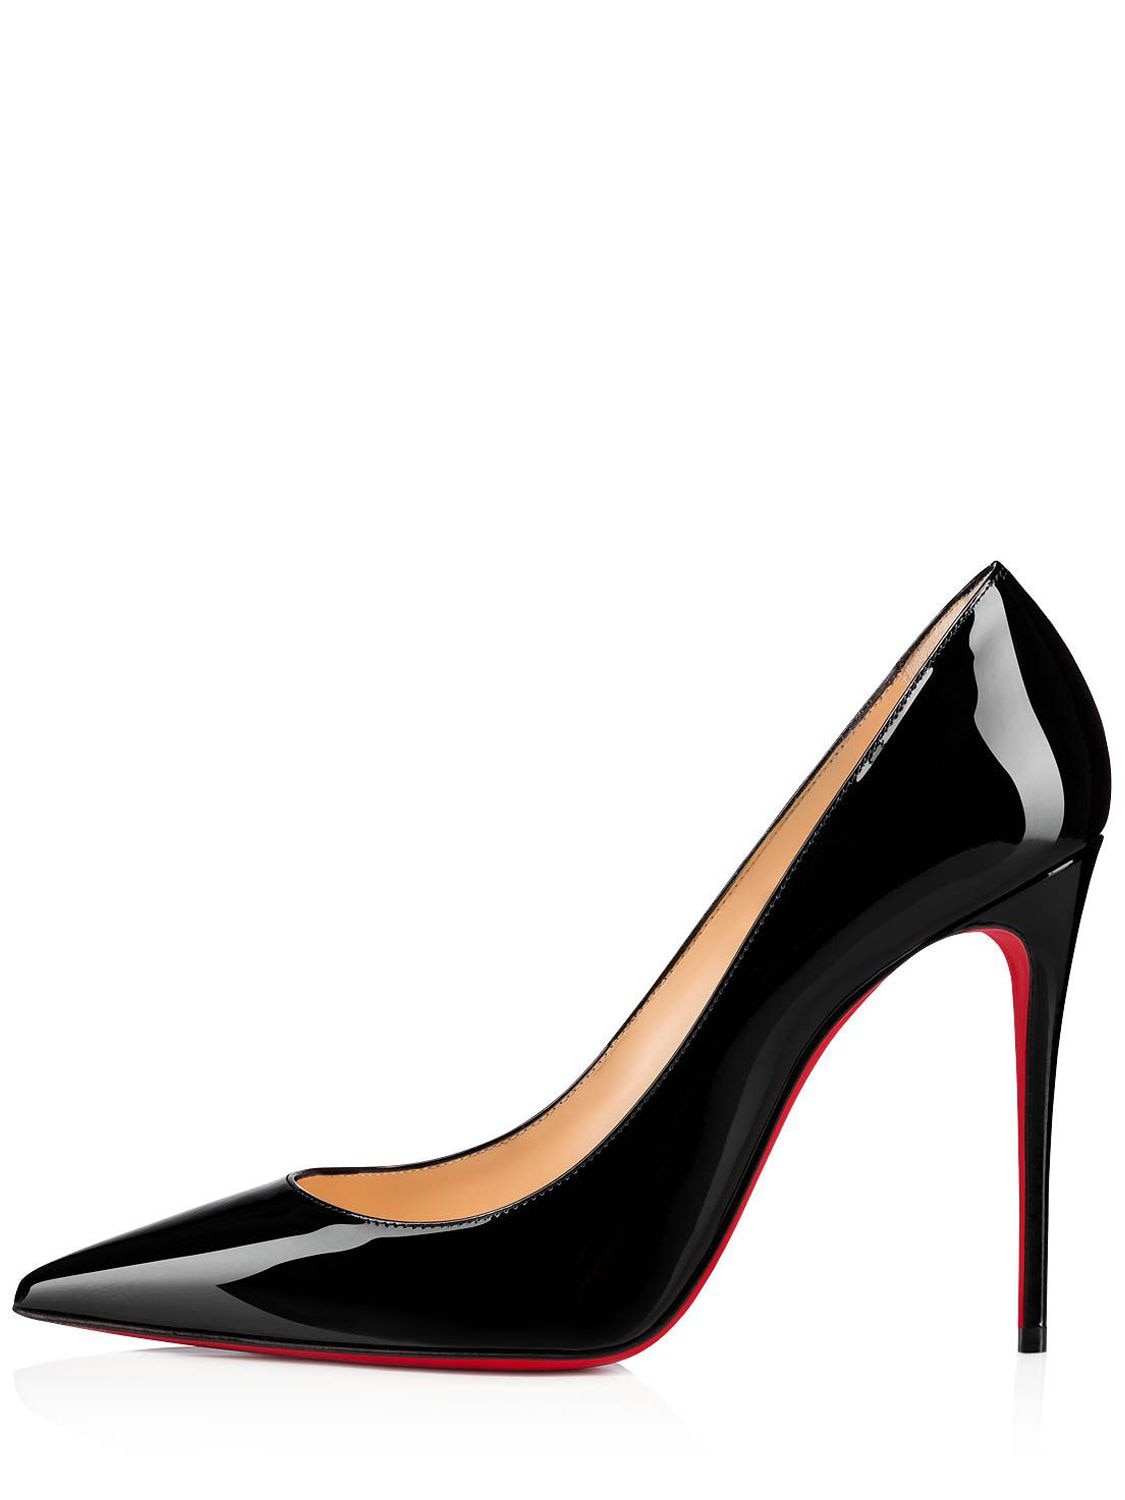 Christian Louboutin 100mm Kate Patent Leather Pumps In Black